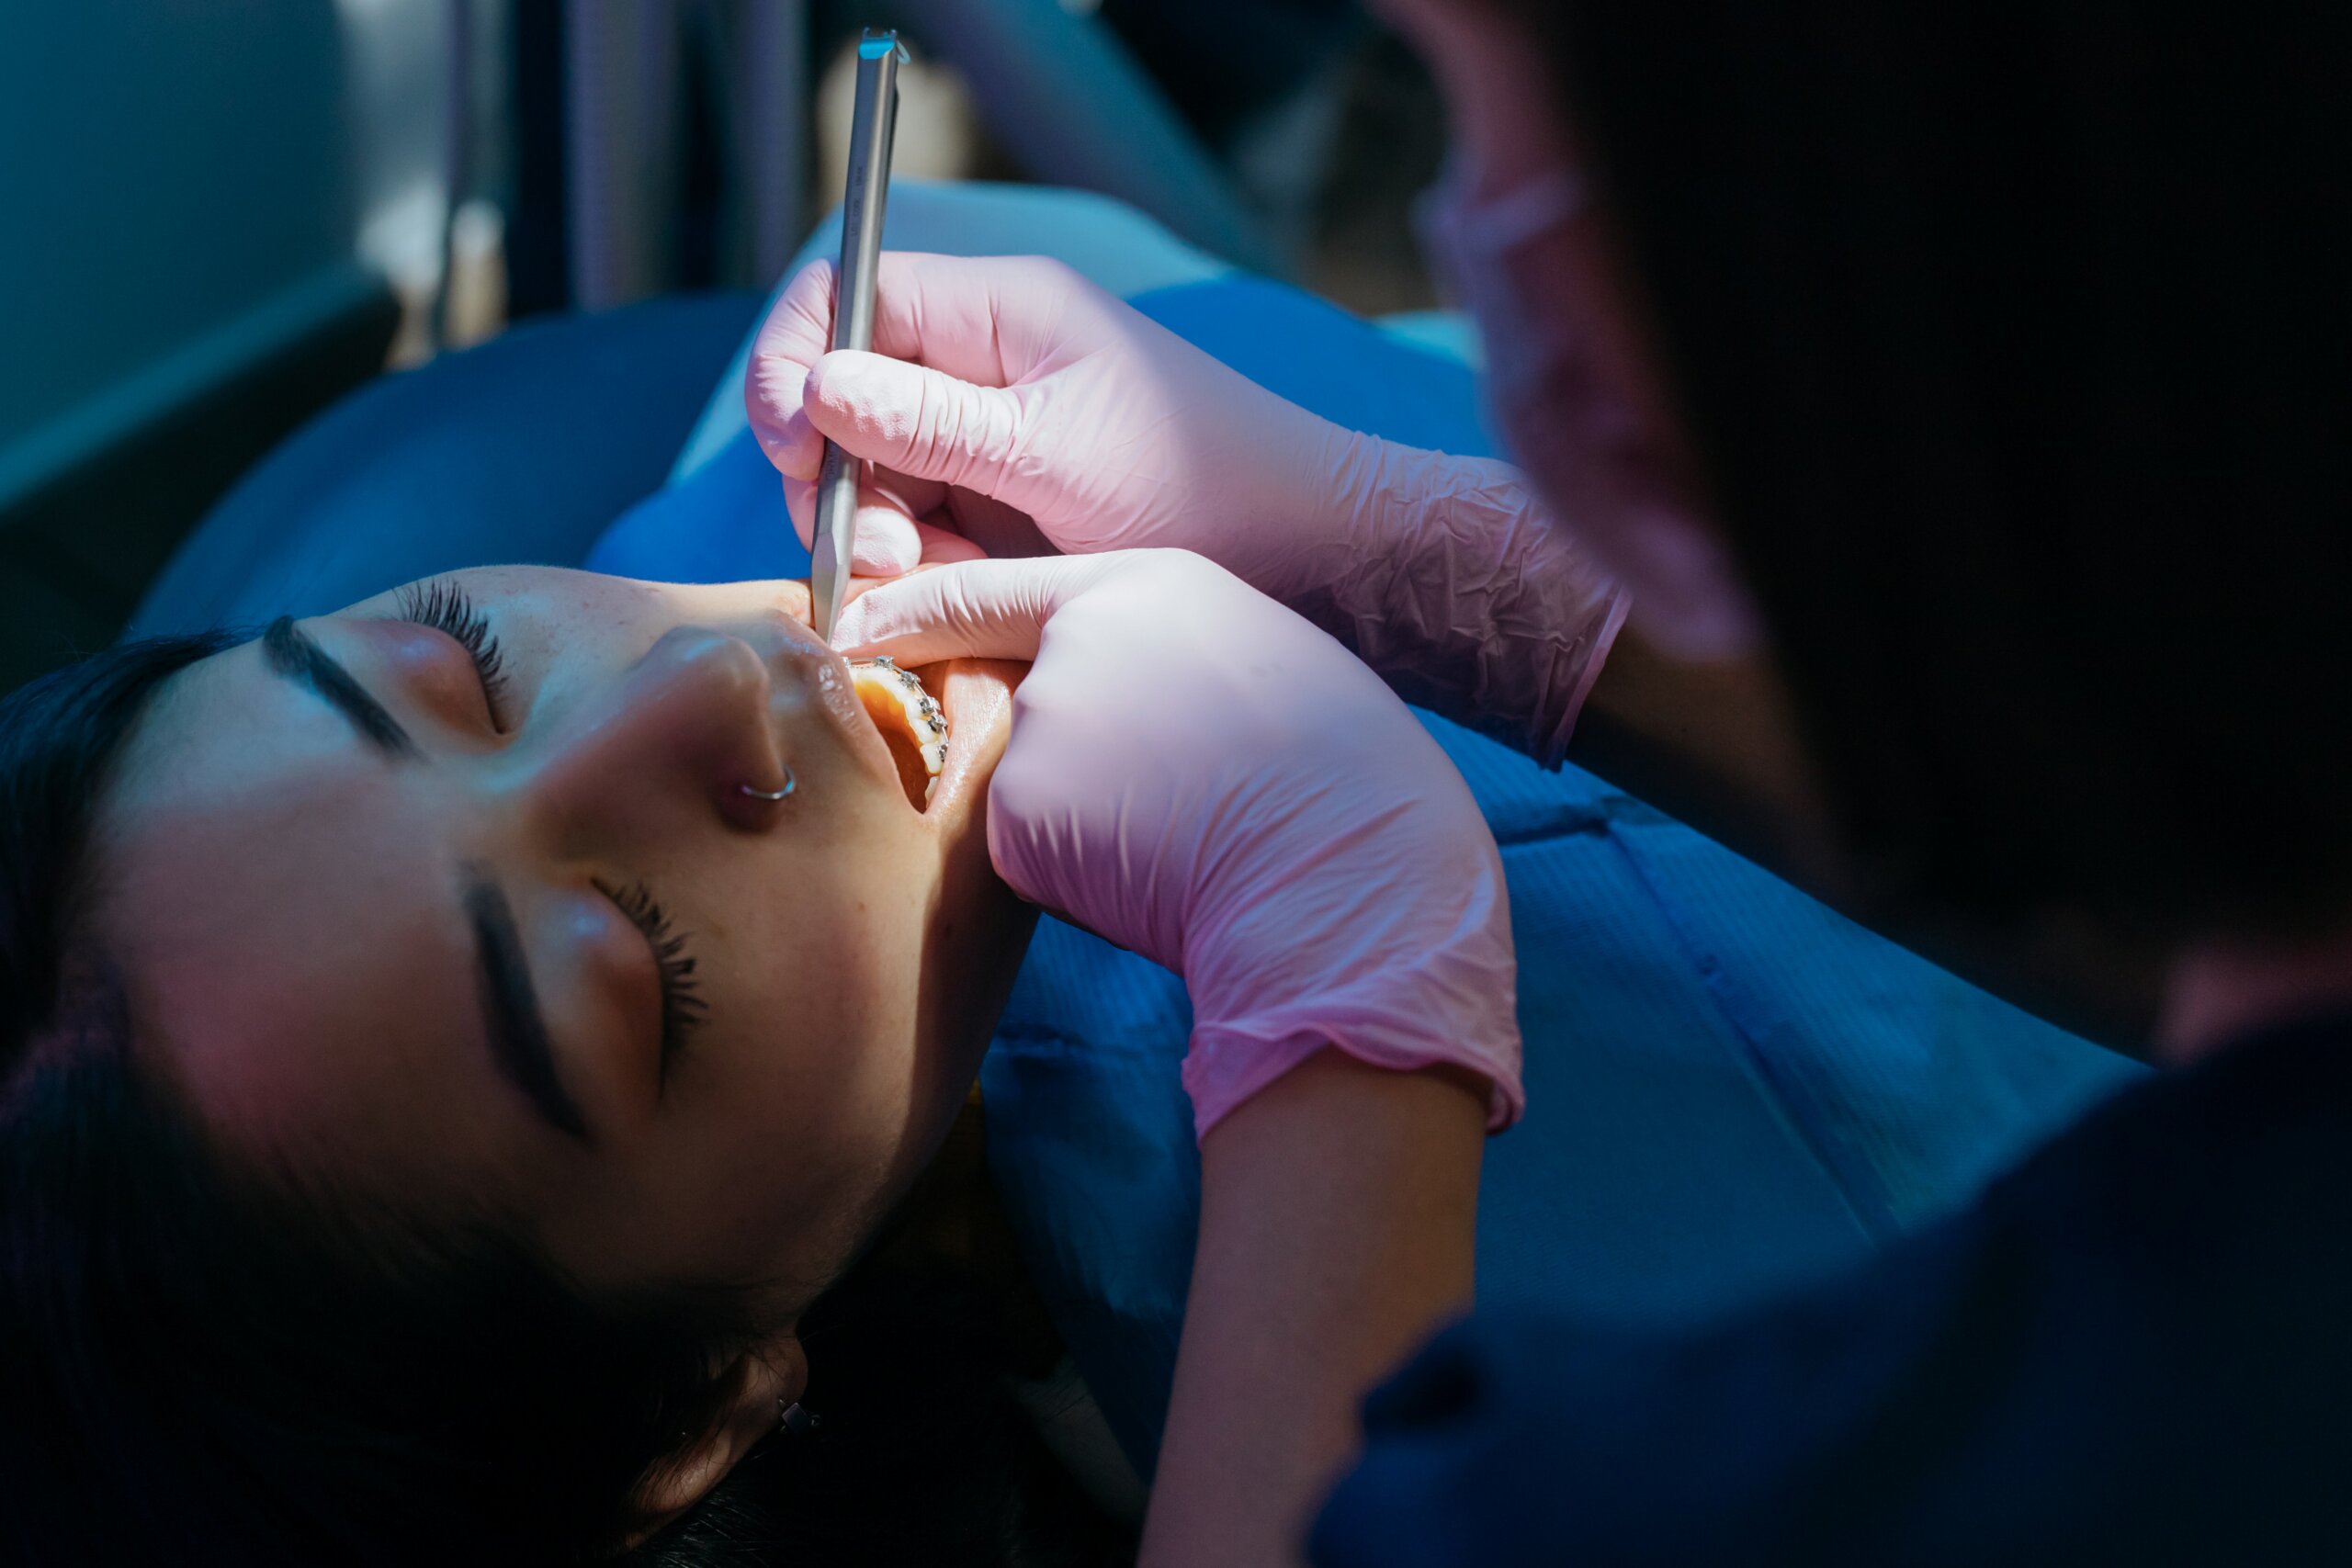 Dental examination in progress with a patient reclining as a dentist performs a check-up.